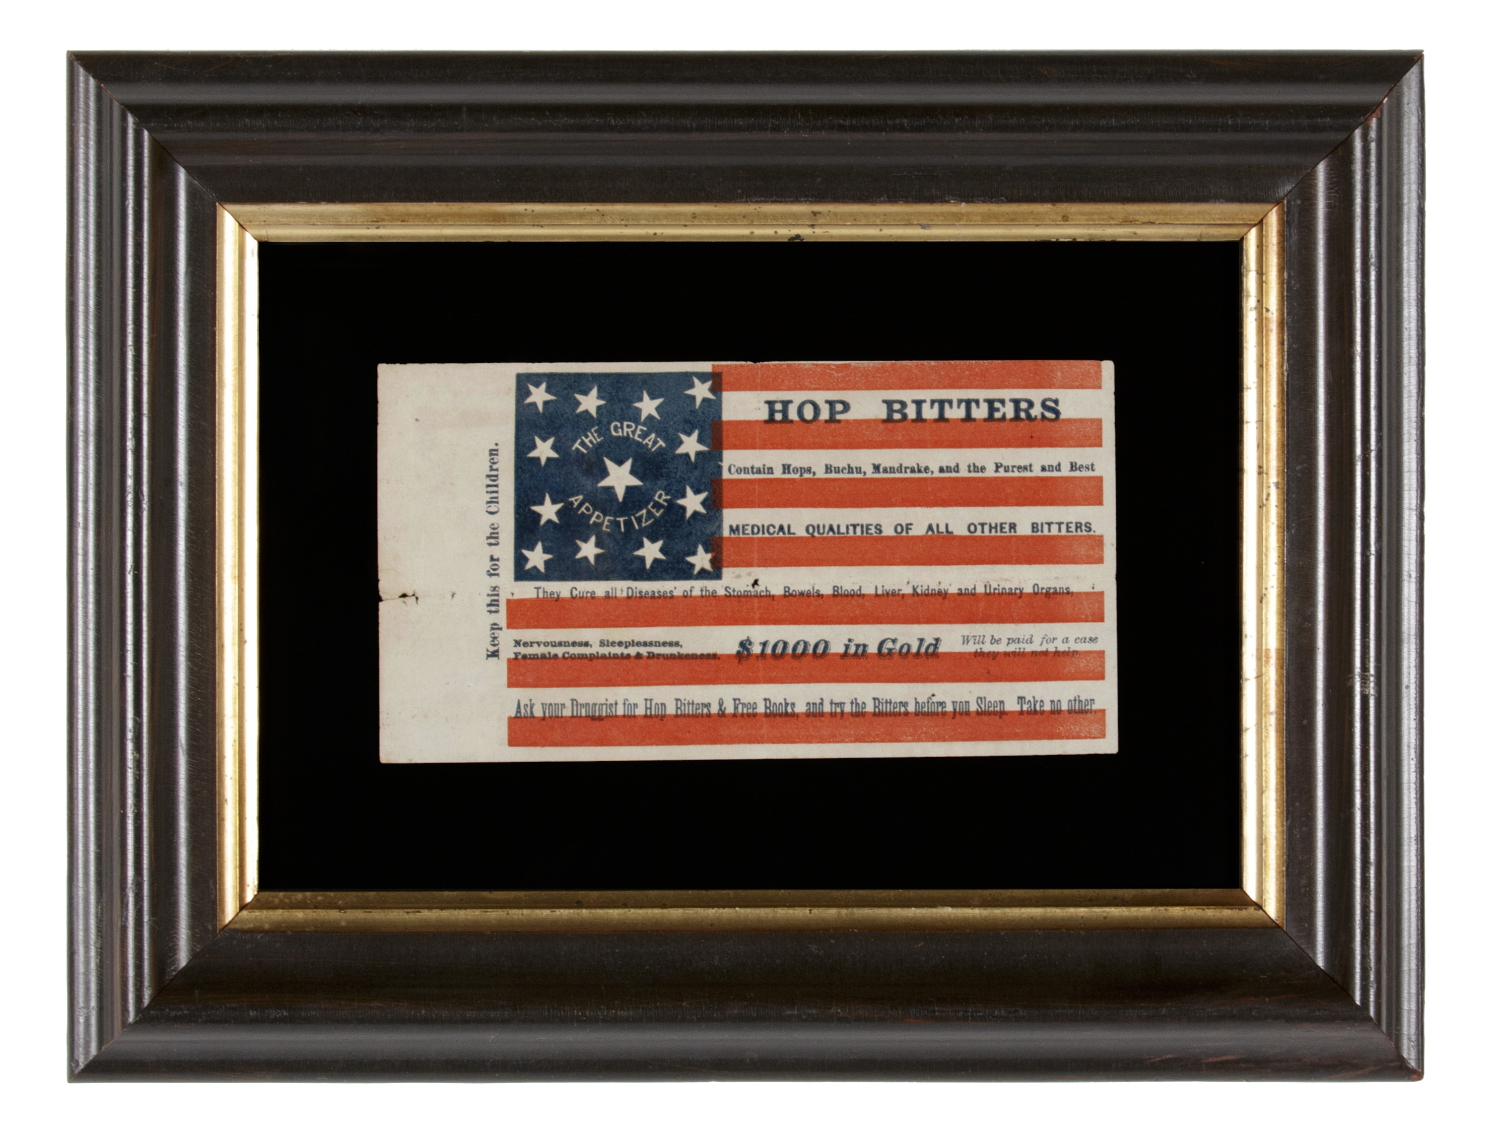 13 STARS IN AN UNUSUAL PATTERN ON A RARE PAPER PARADE FLAG WITH ADVERTISING HOP BITTERS, PROBABLY DISTRIBUTED FOR THE 1876 CENTENNIAL